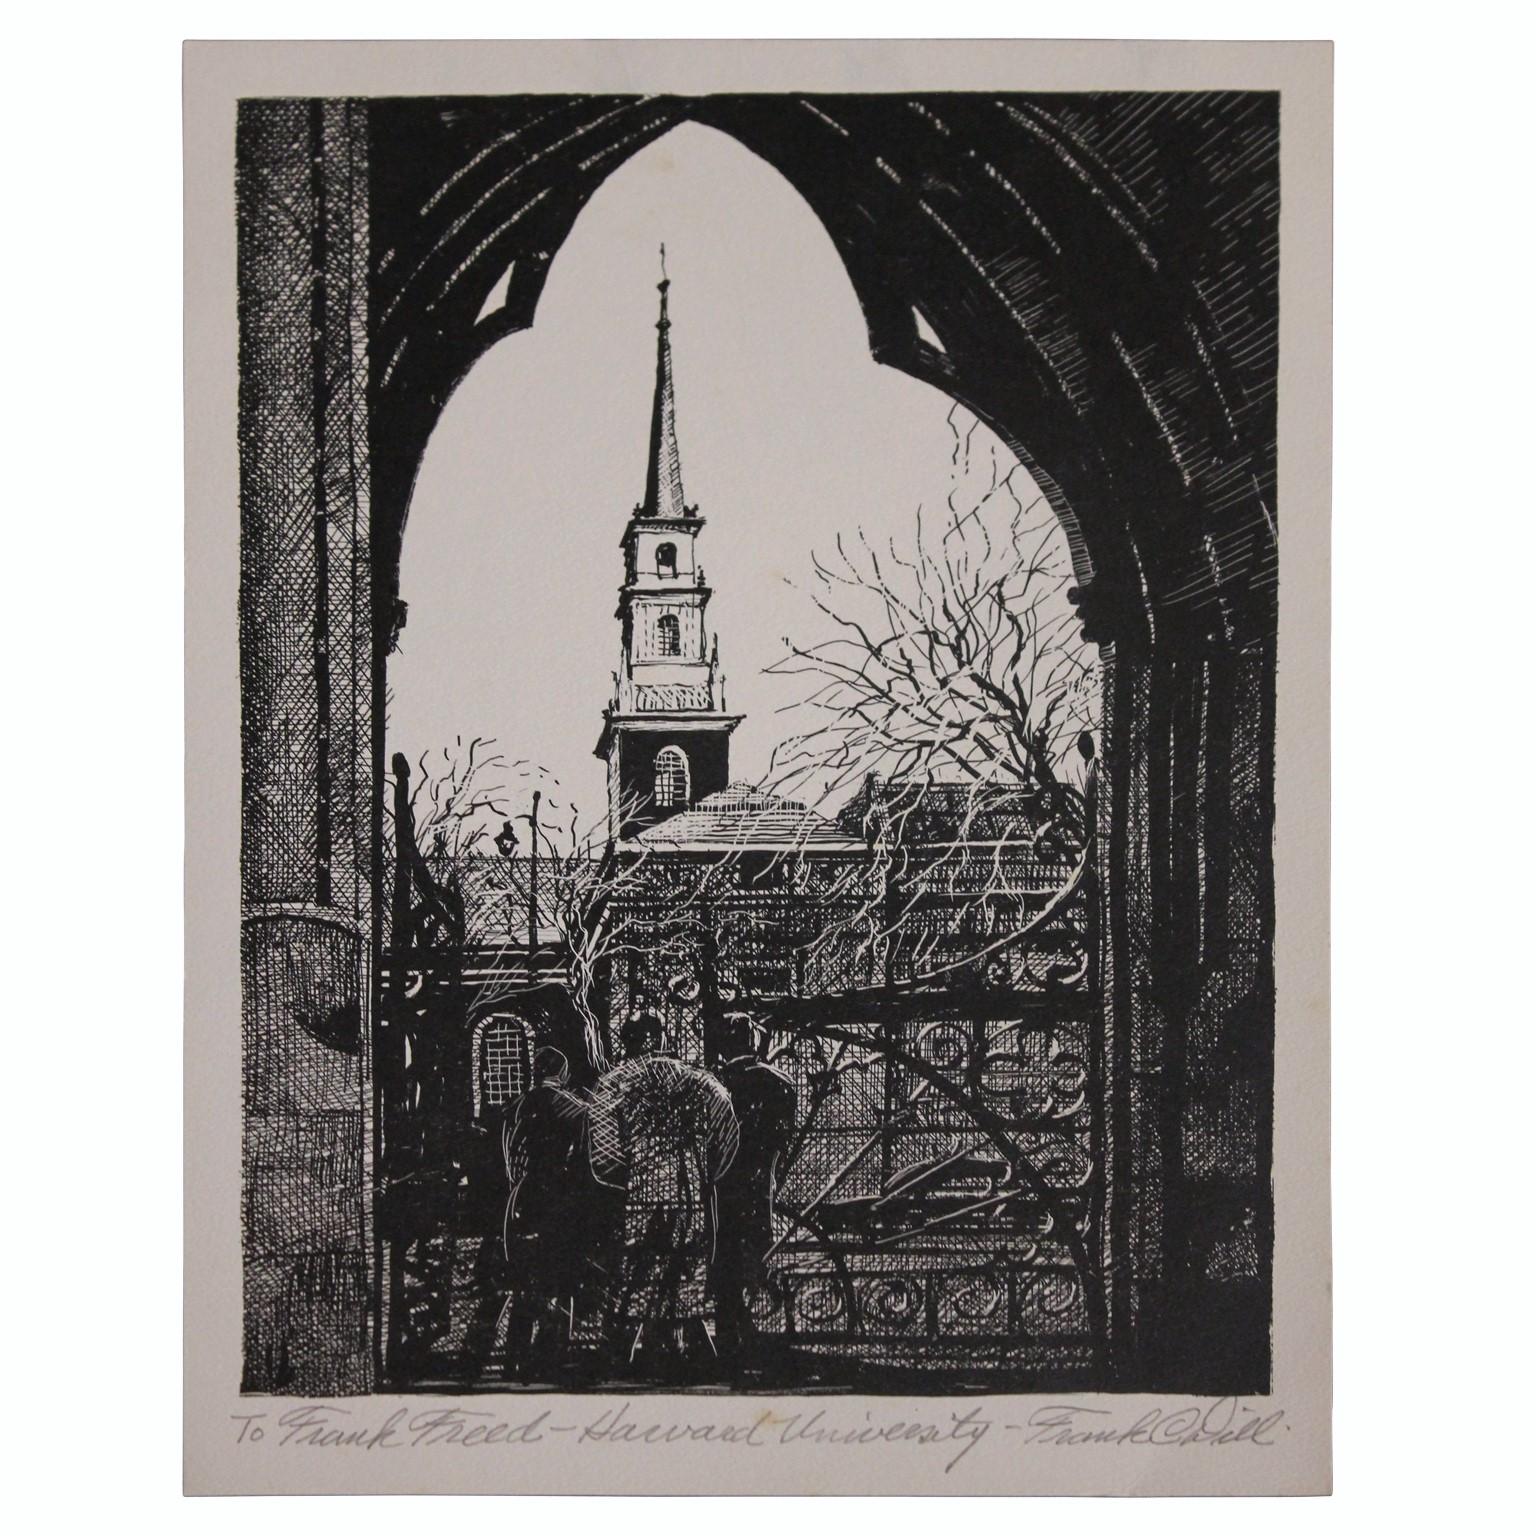 Frank C. Dill Landscape Print - "Harvard University" Architectural Etching to Frank Freed